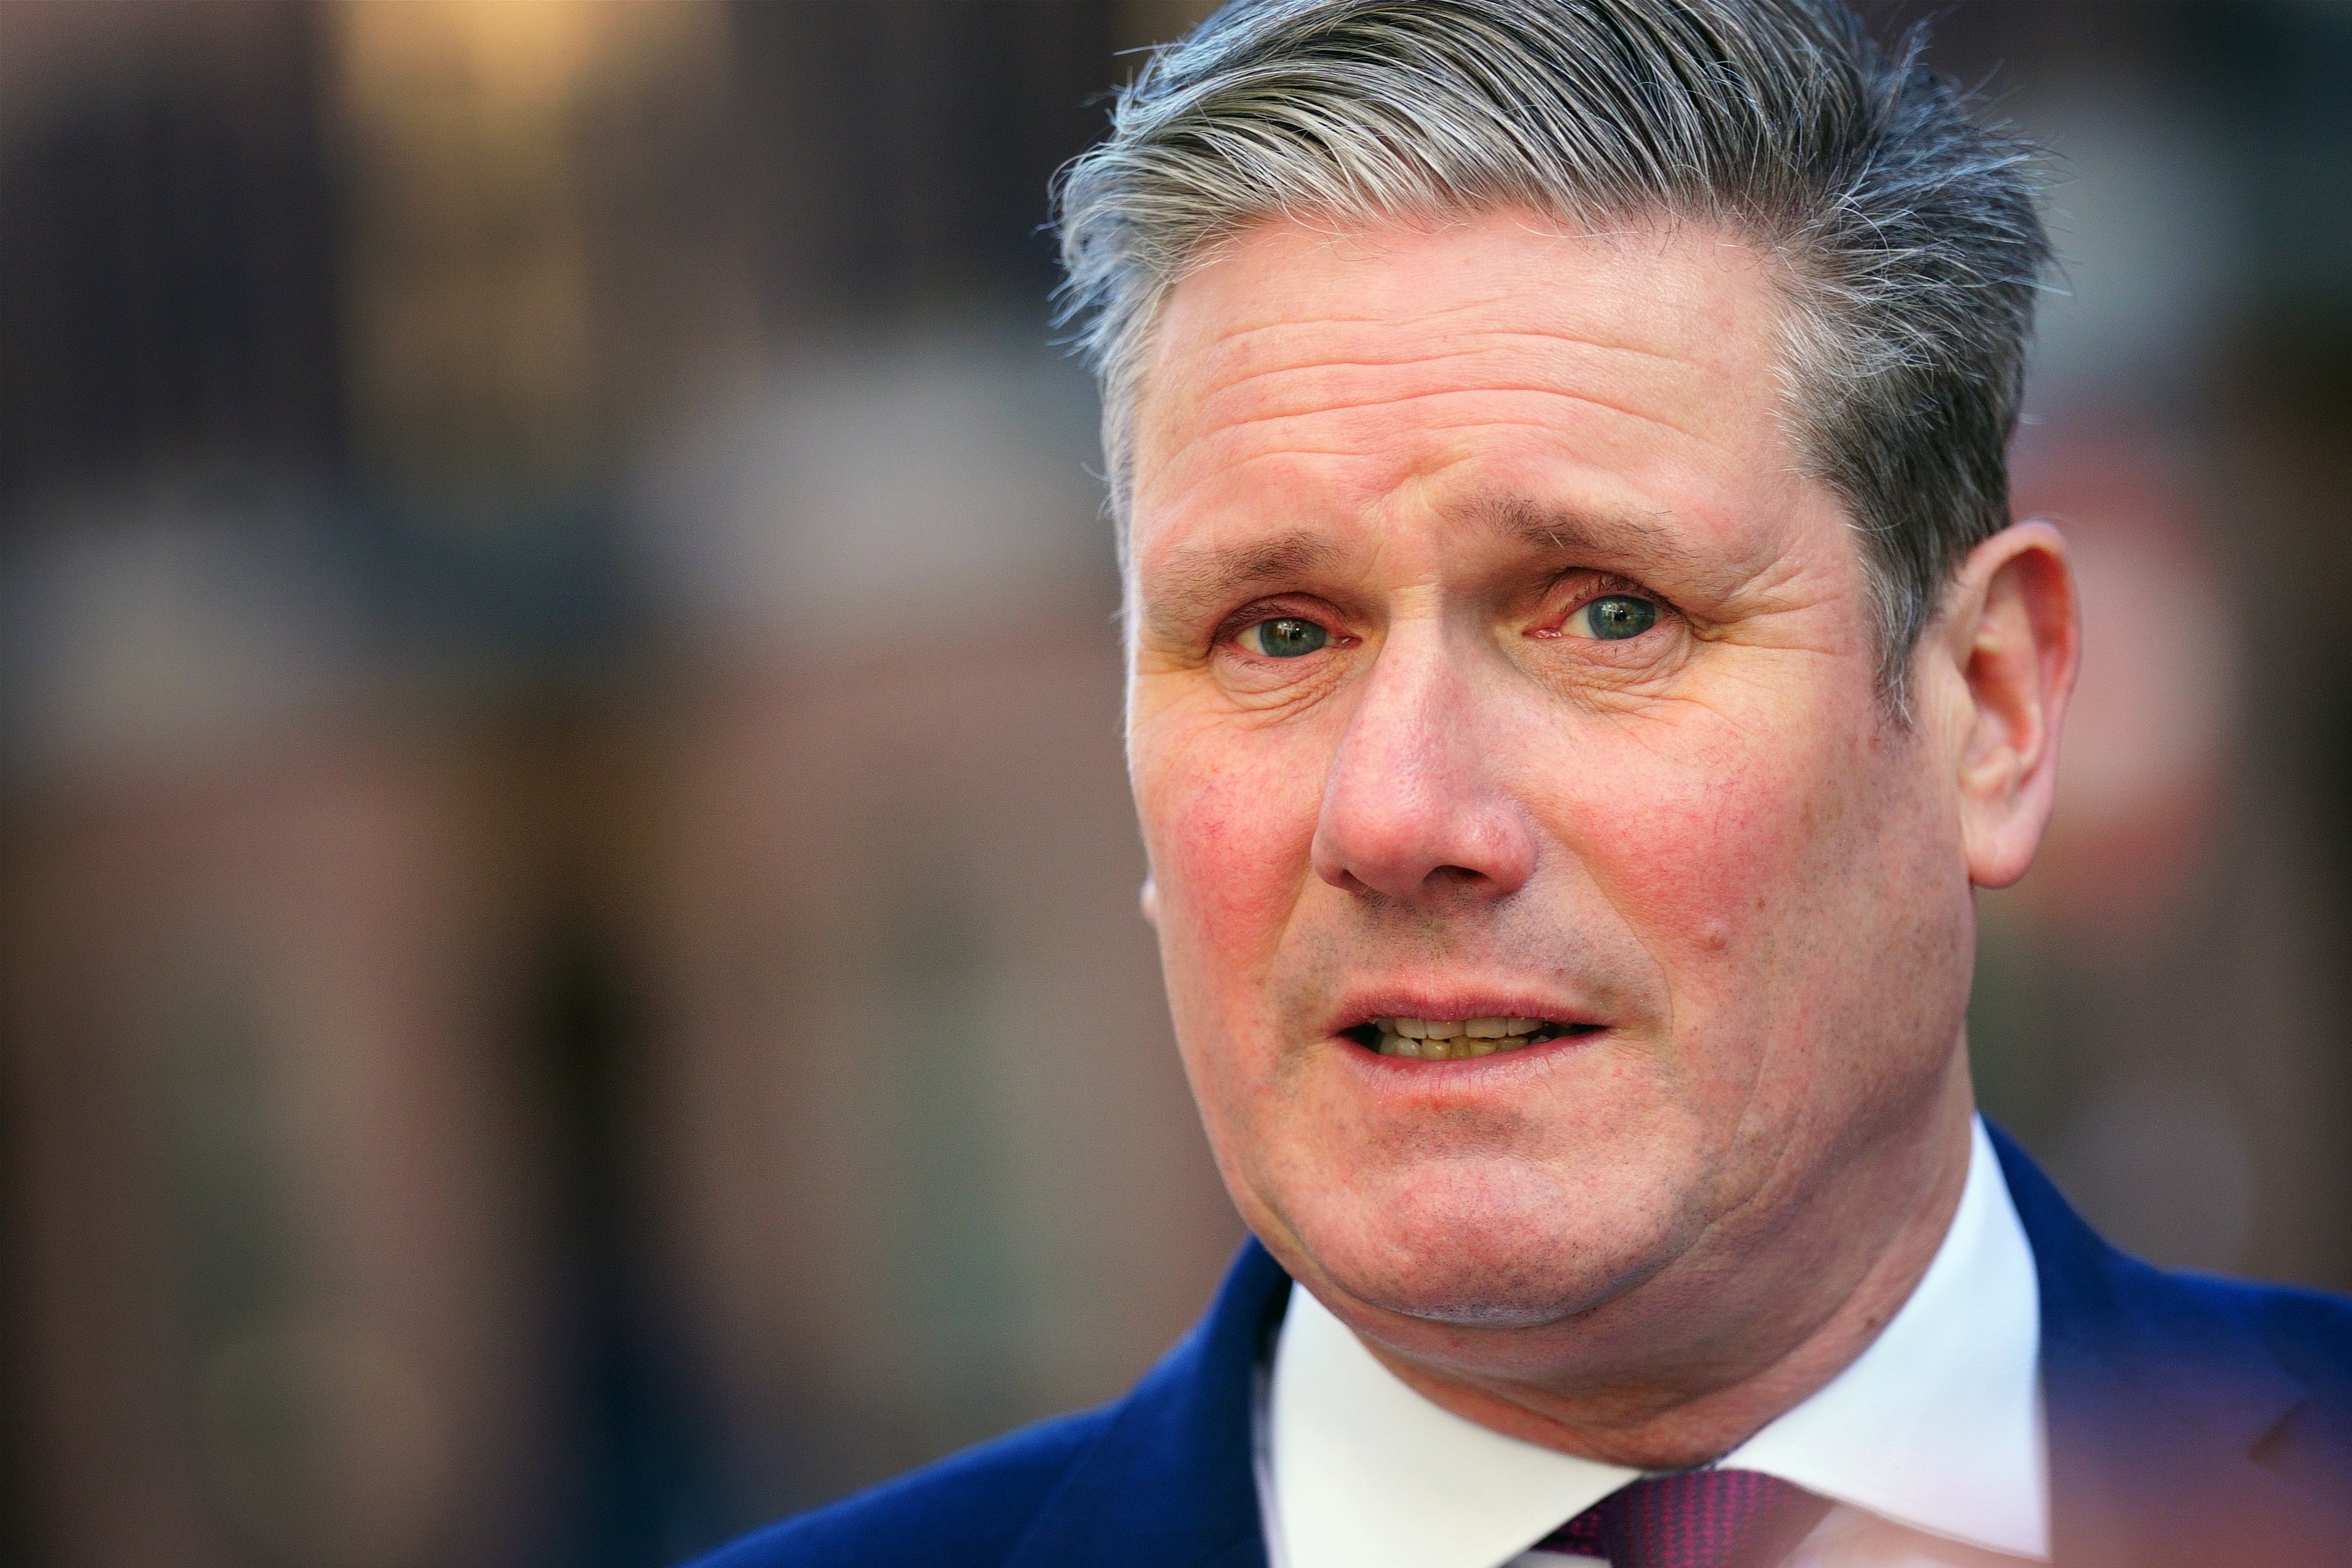 Labour leader Sir Keir Starmer was targeted outside Scotland Yard